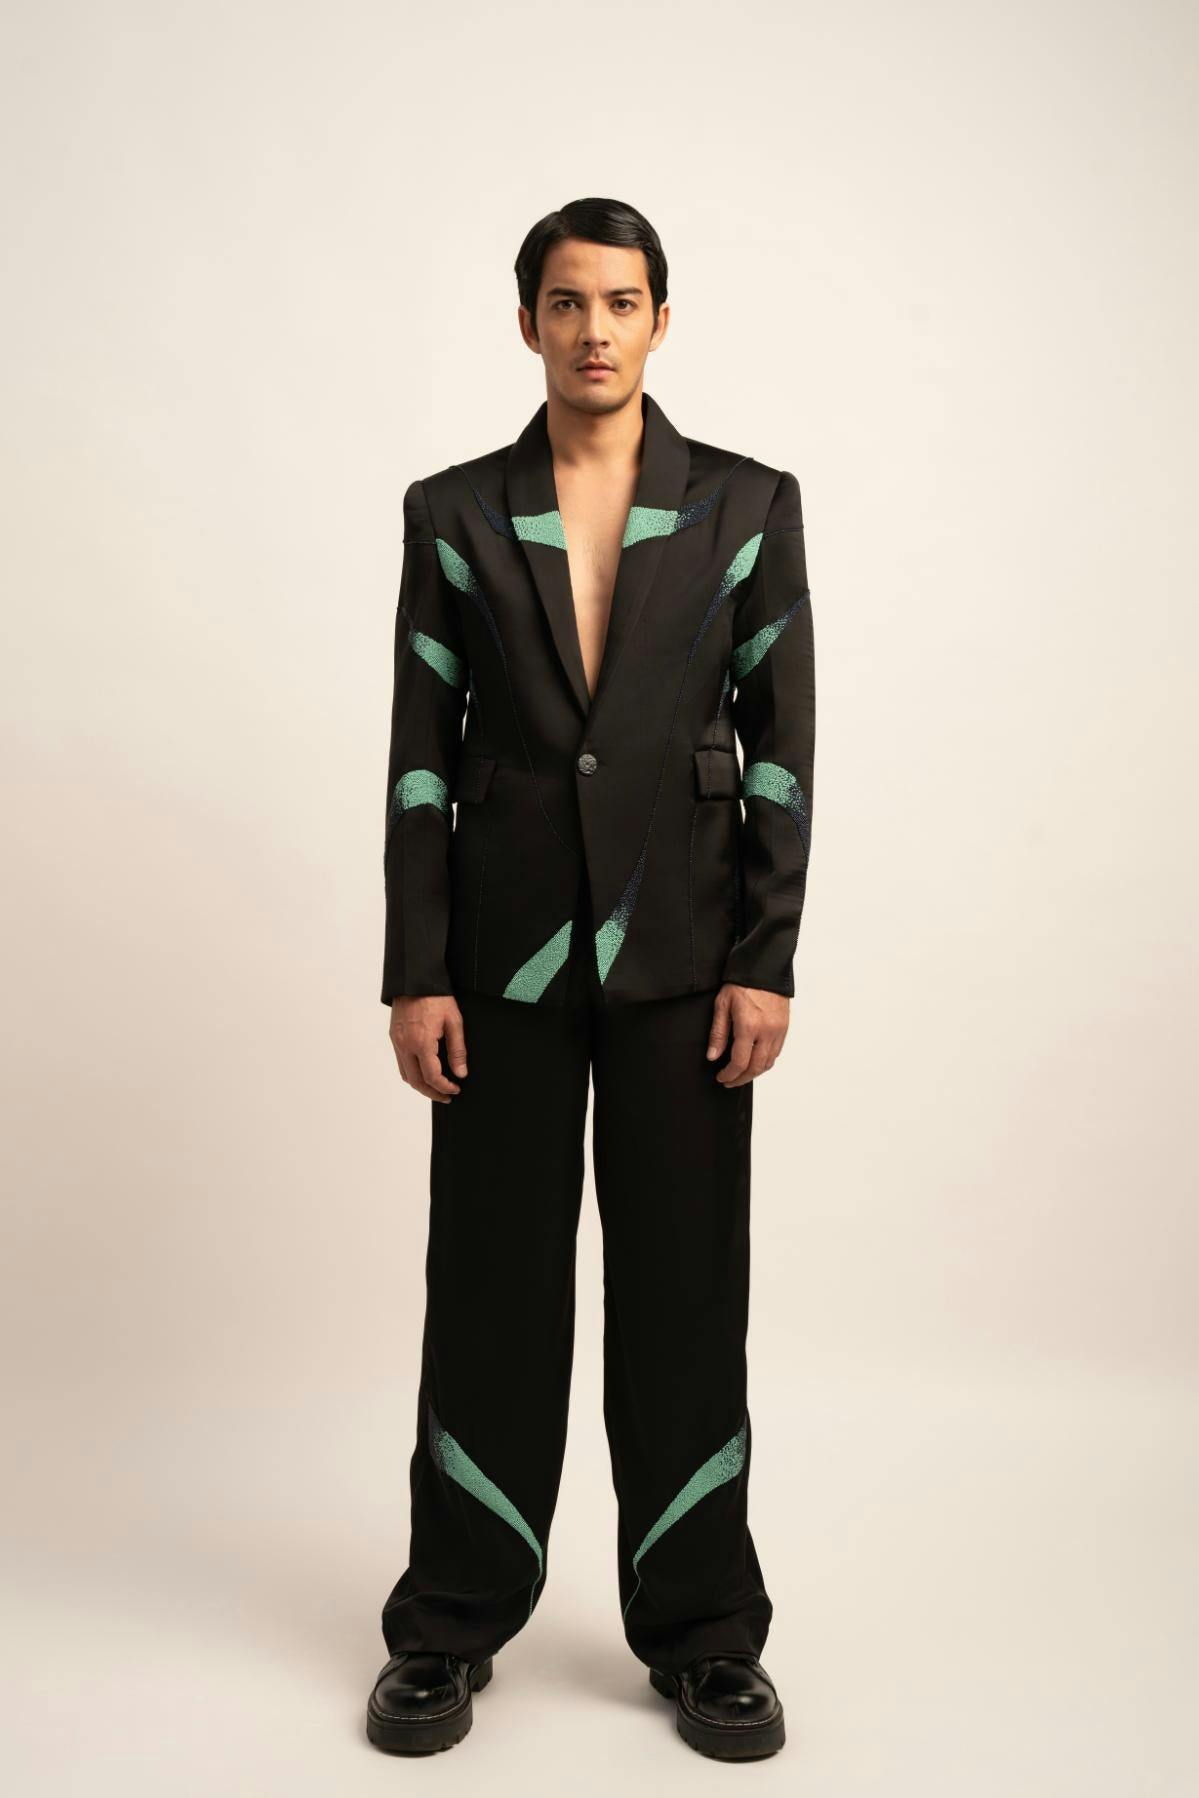 The Astral Fusion Blazer Set, a product by Siddhant Agrawal Label